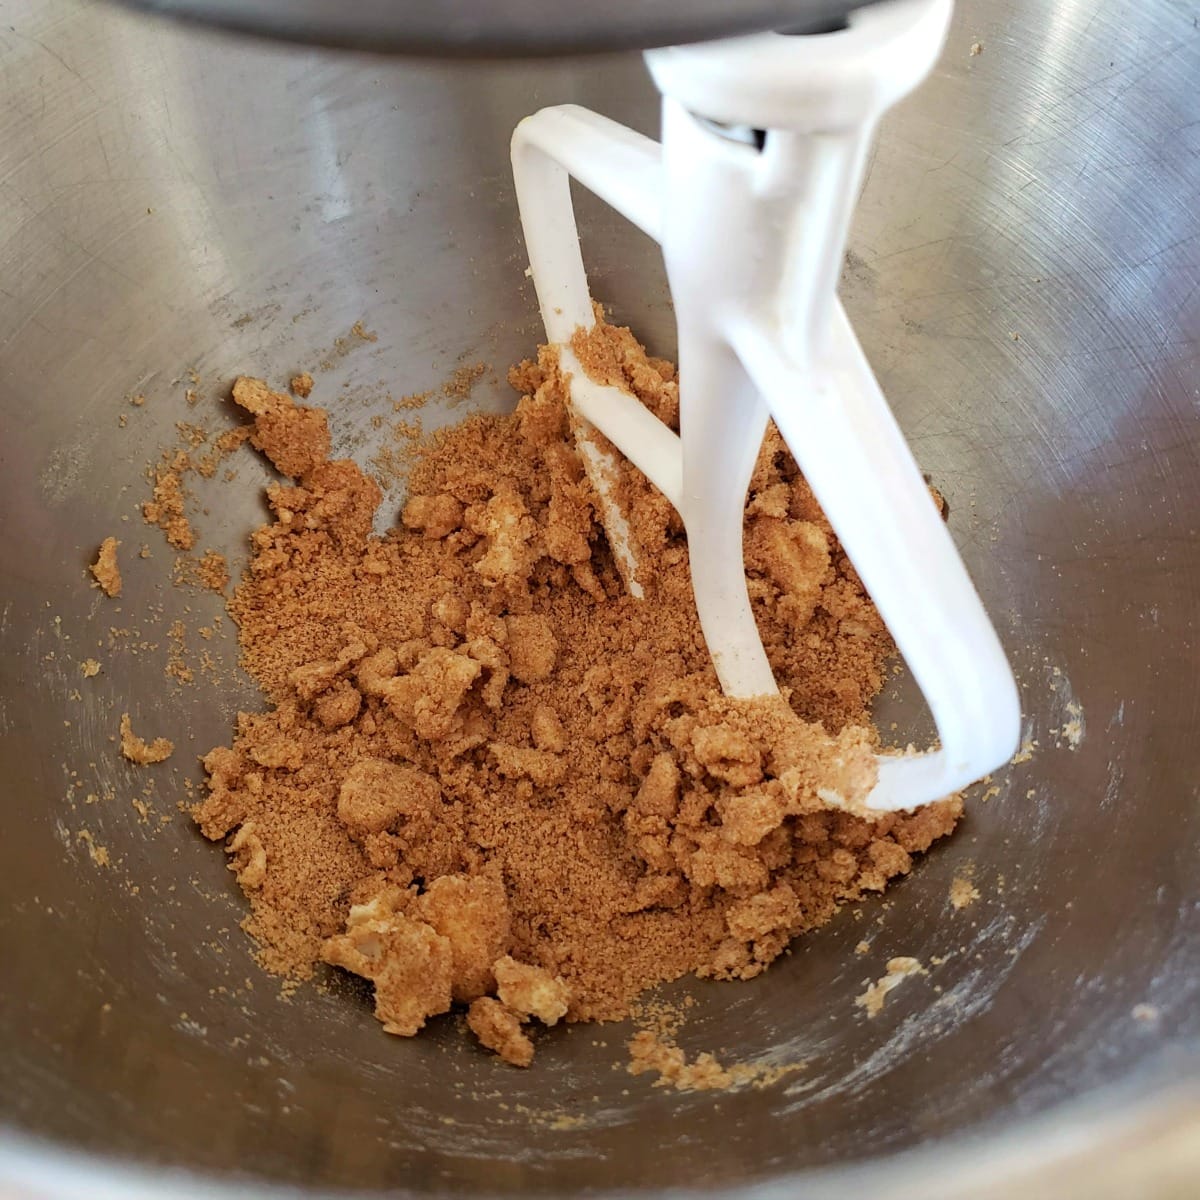 Mixing the streusel